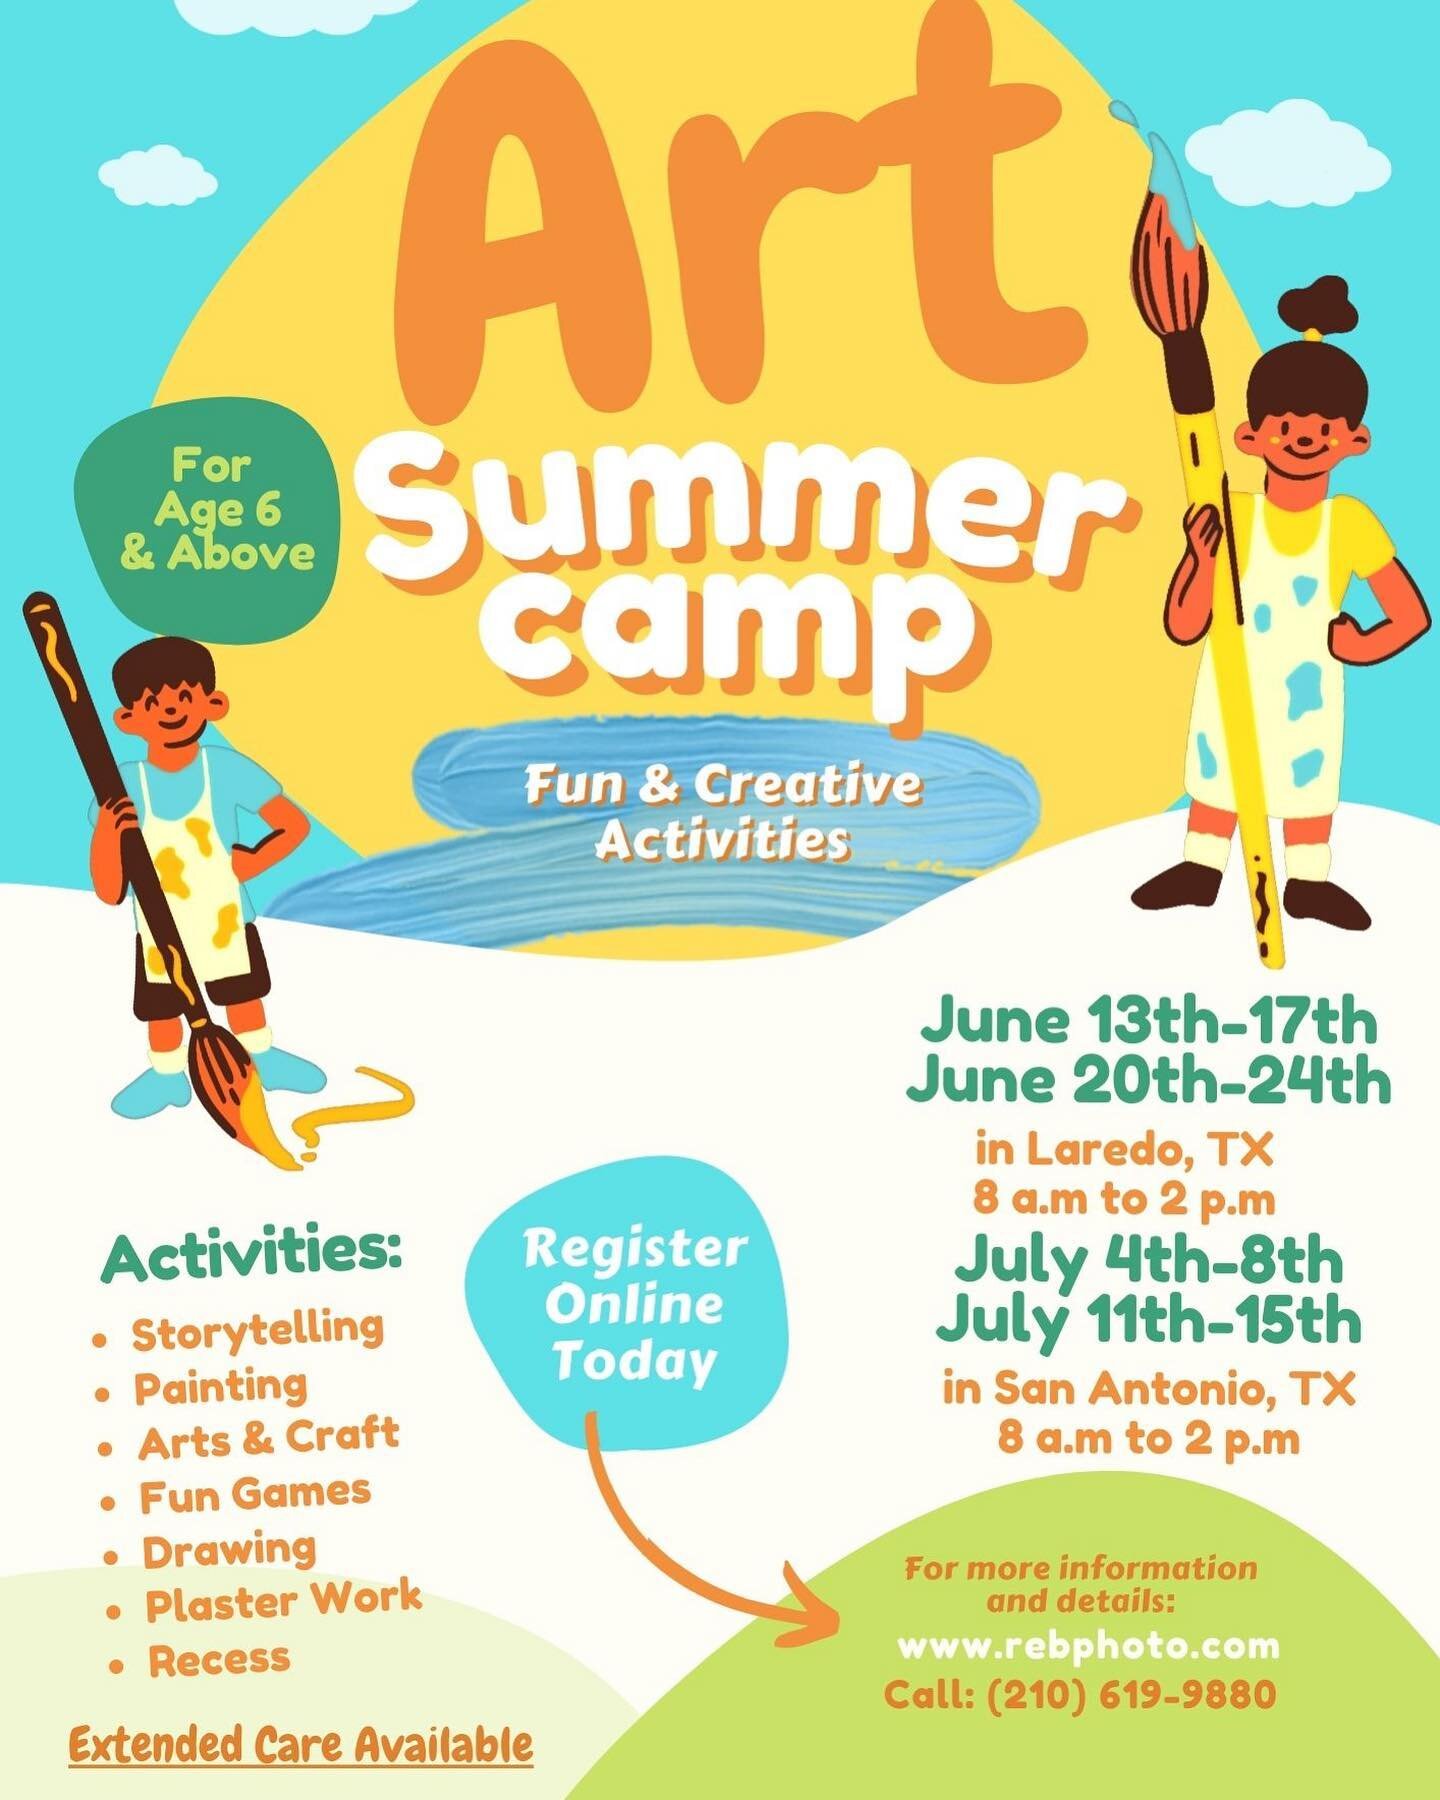 Good Morning! This summer we are introducing REB Summer Art Camp! Children will explore the world of ART! Our open-ended projects allow children to work at their own pace, creating artwork that is specific to their individual skill level and goals. W